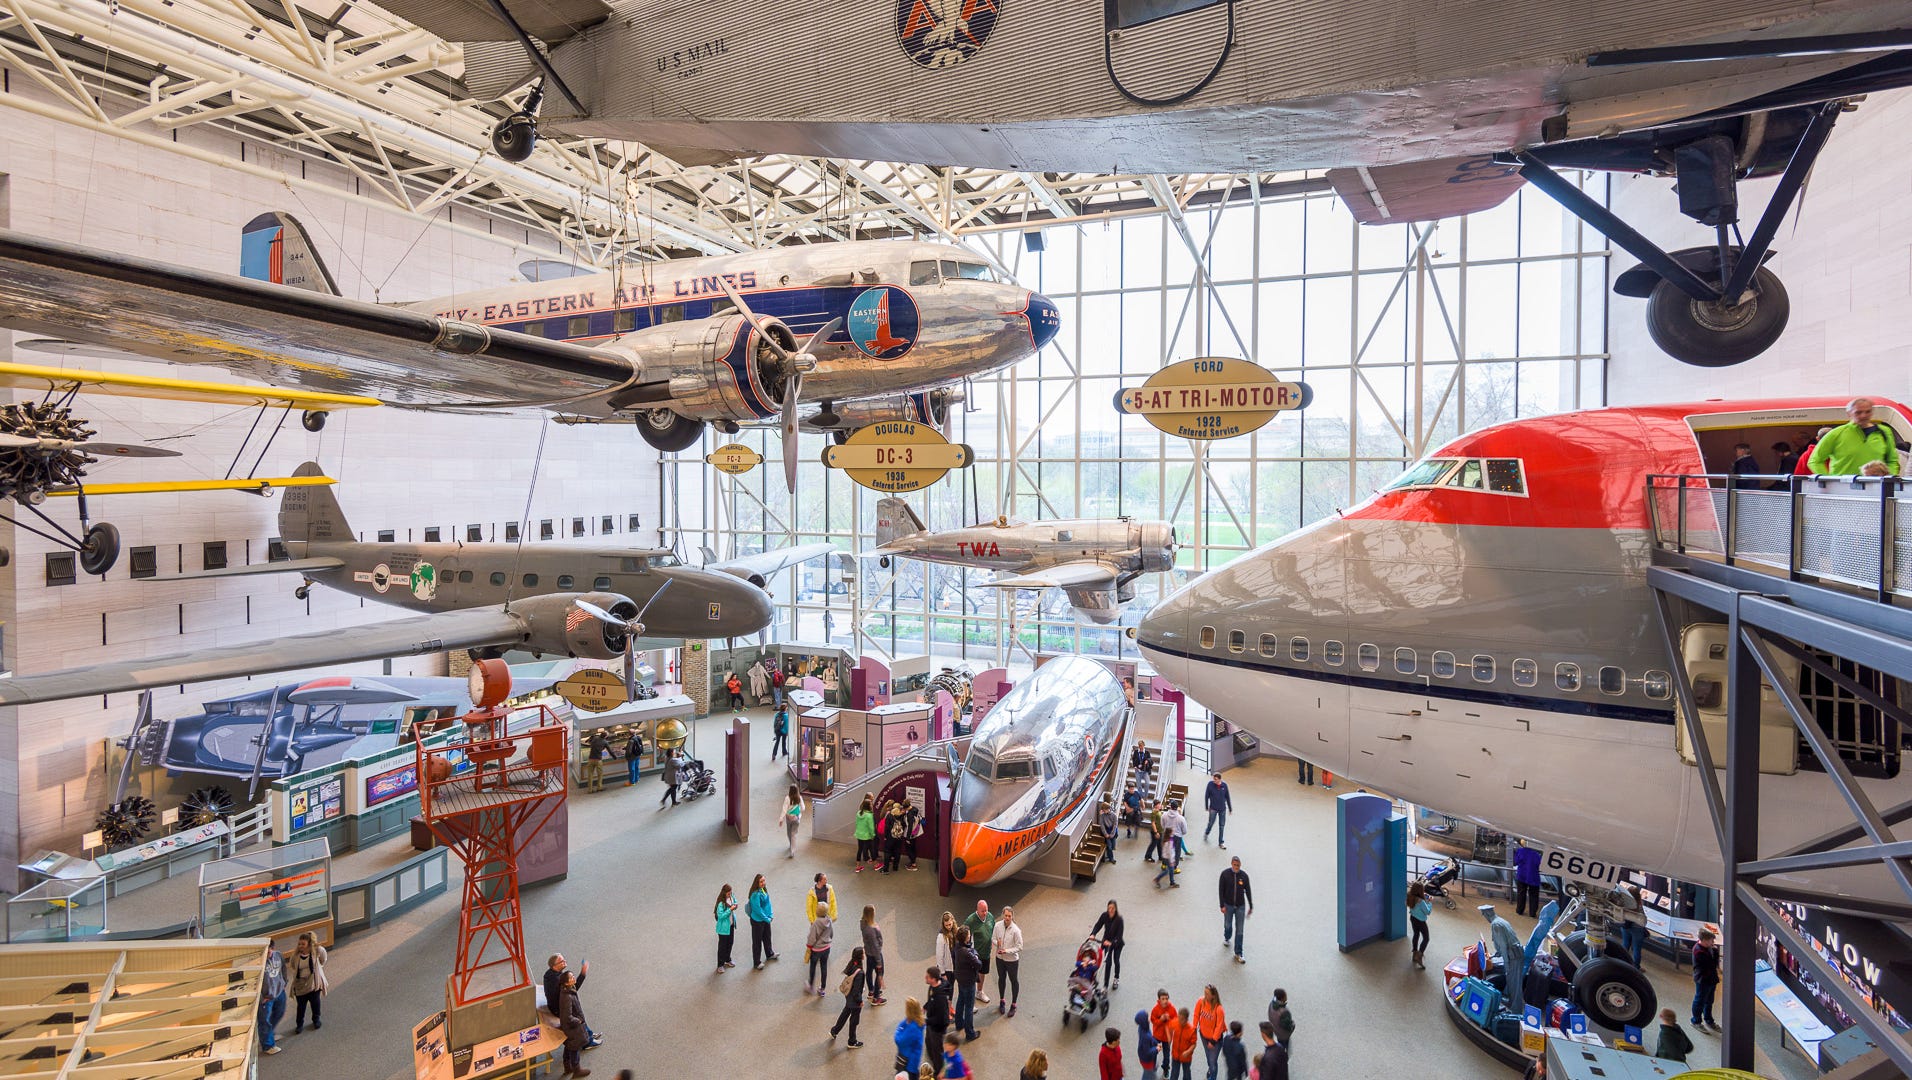 Smithsonian National Air and Space Museum to begin 7-year renovation